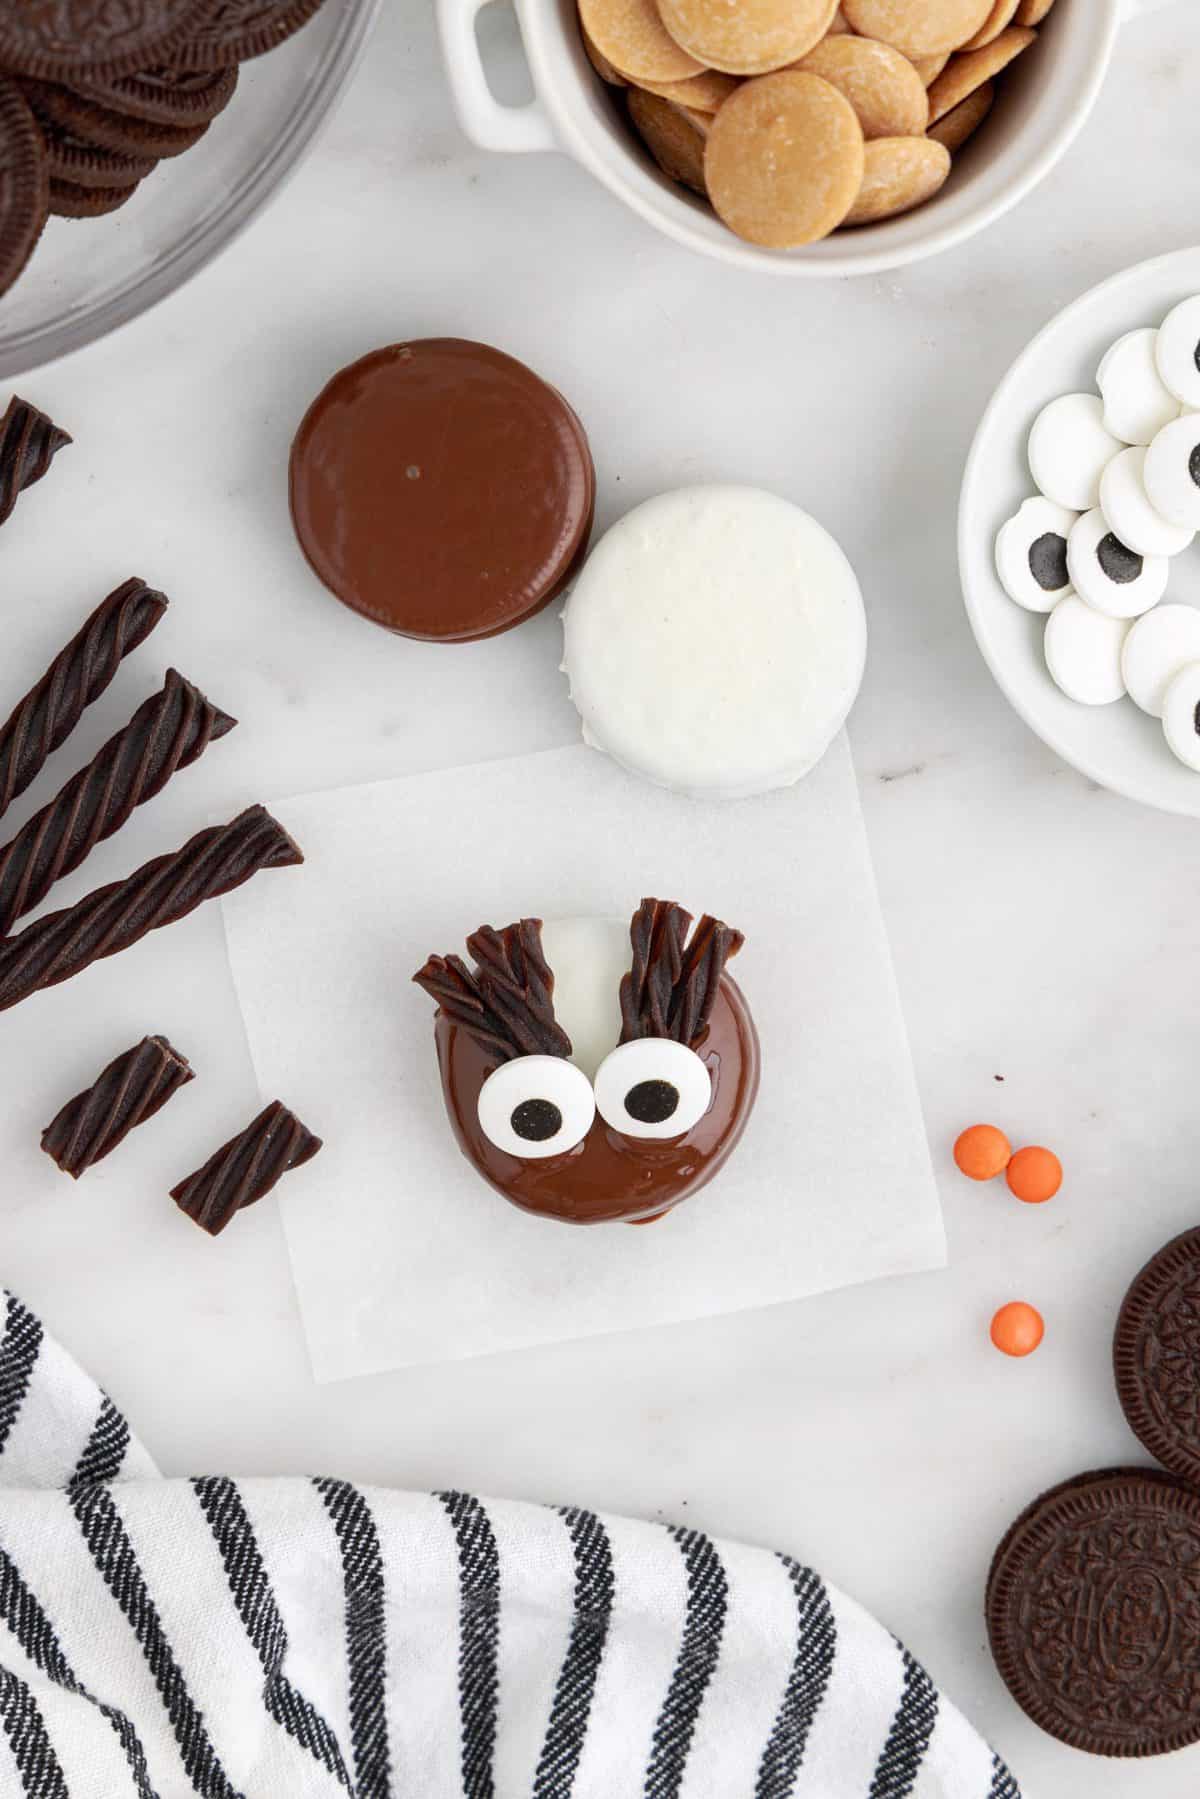 placing the eyeballs and eyelashes to make the cookies look like owls